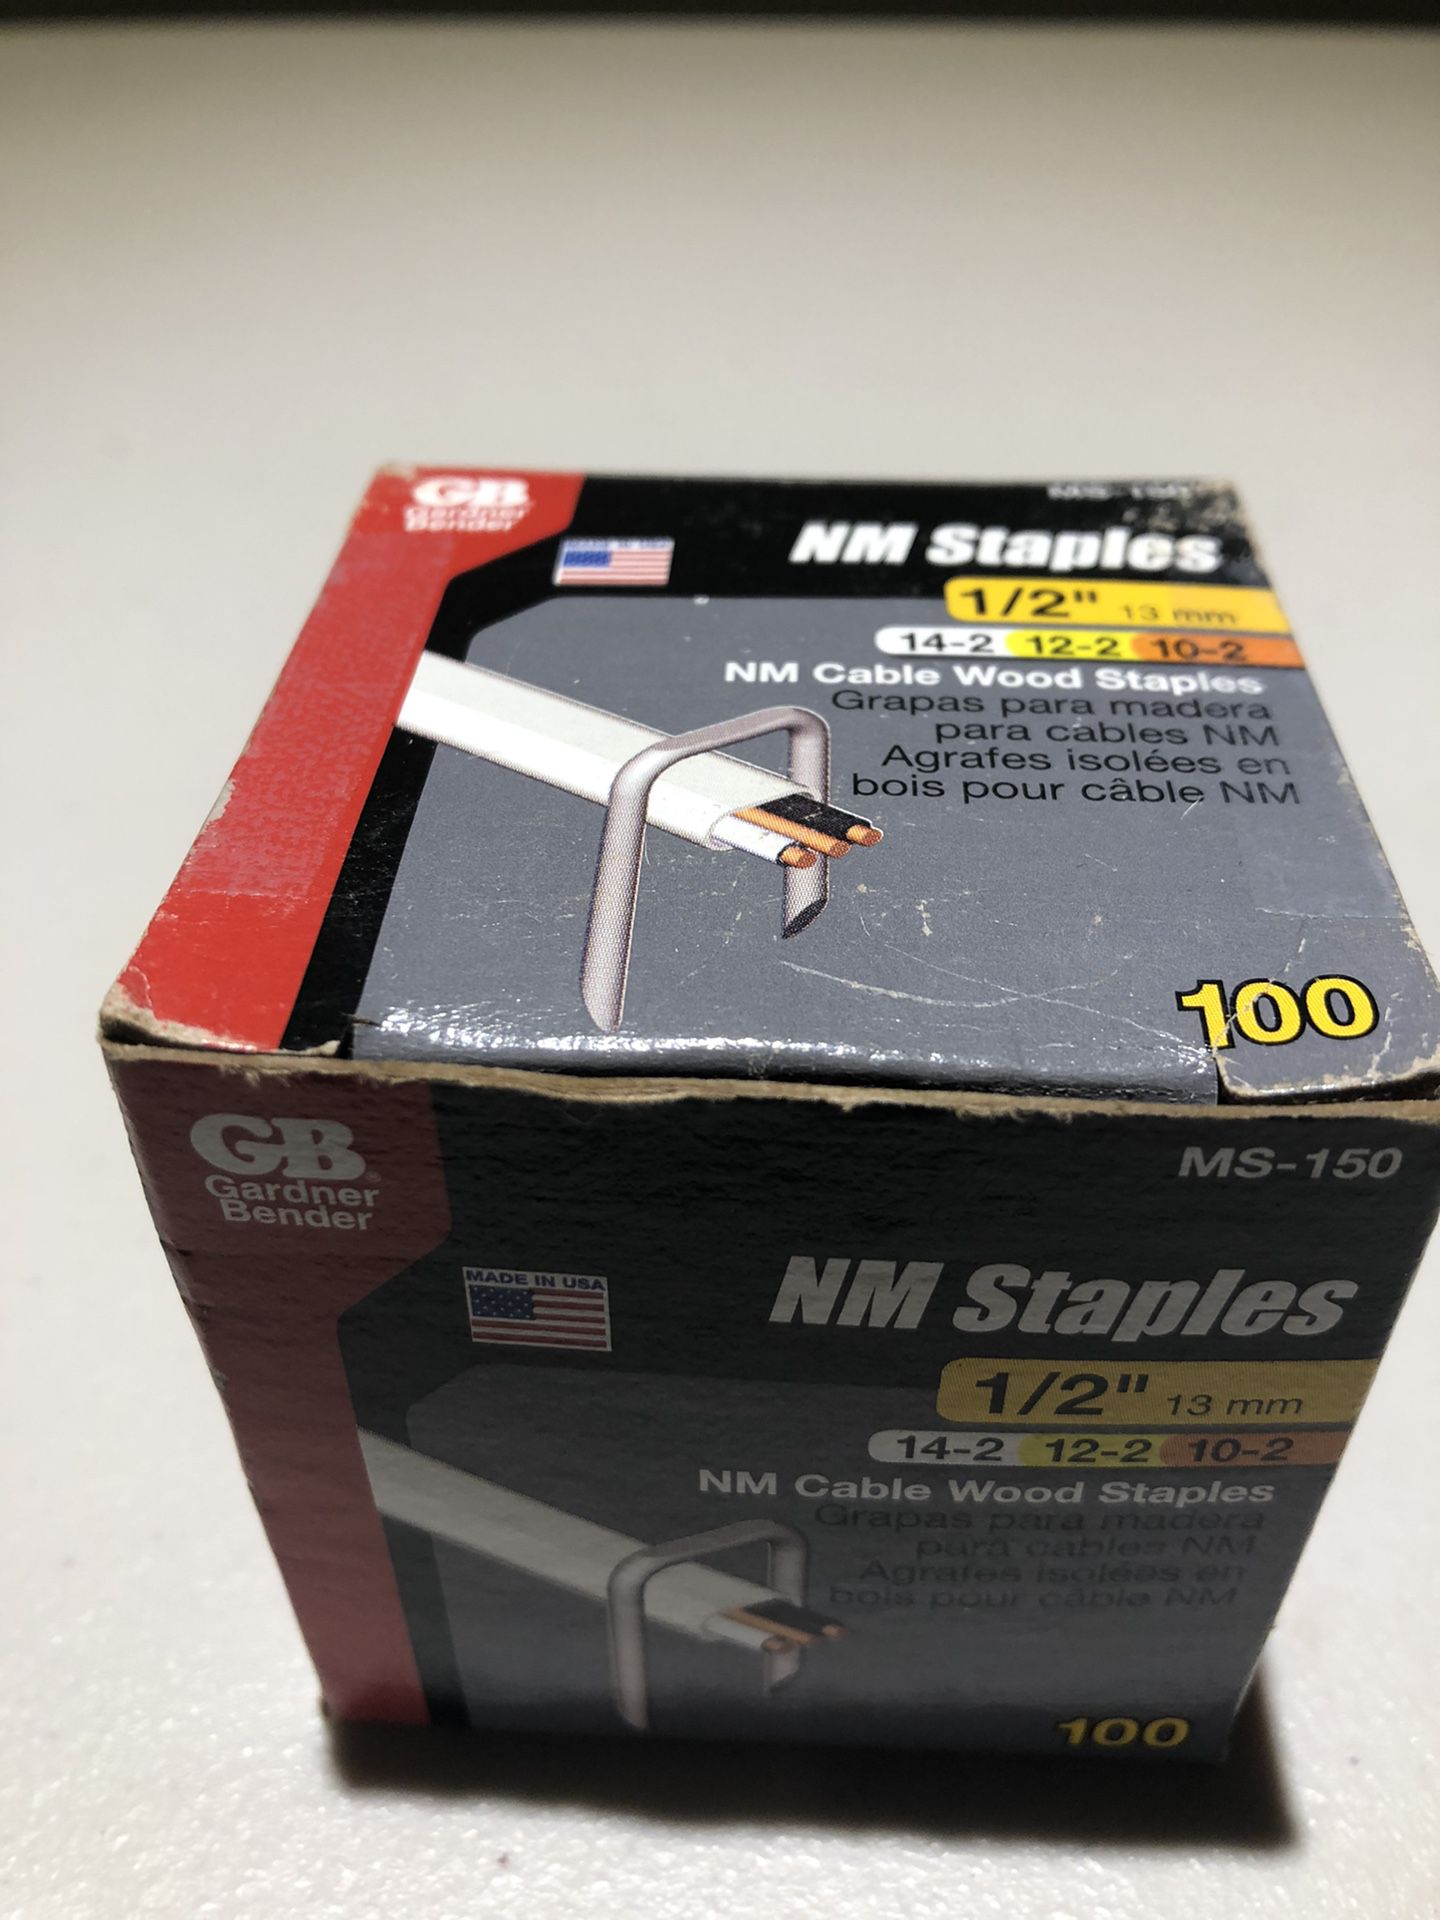 NM Cable Wood Staples : 1/2 Inch 